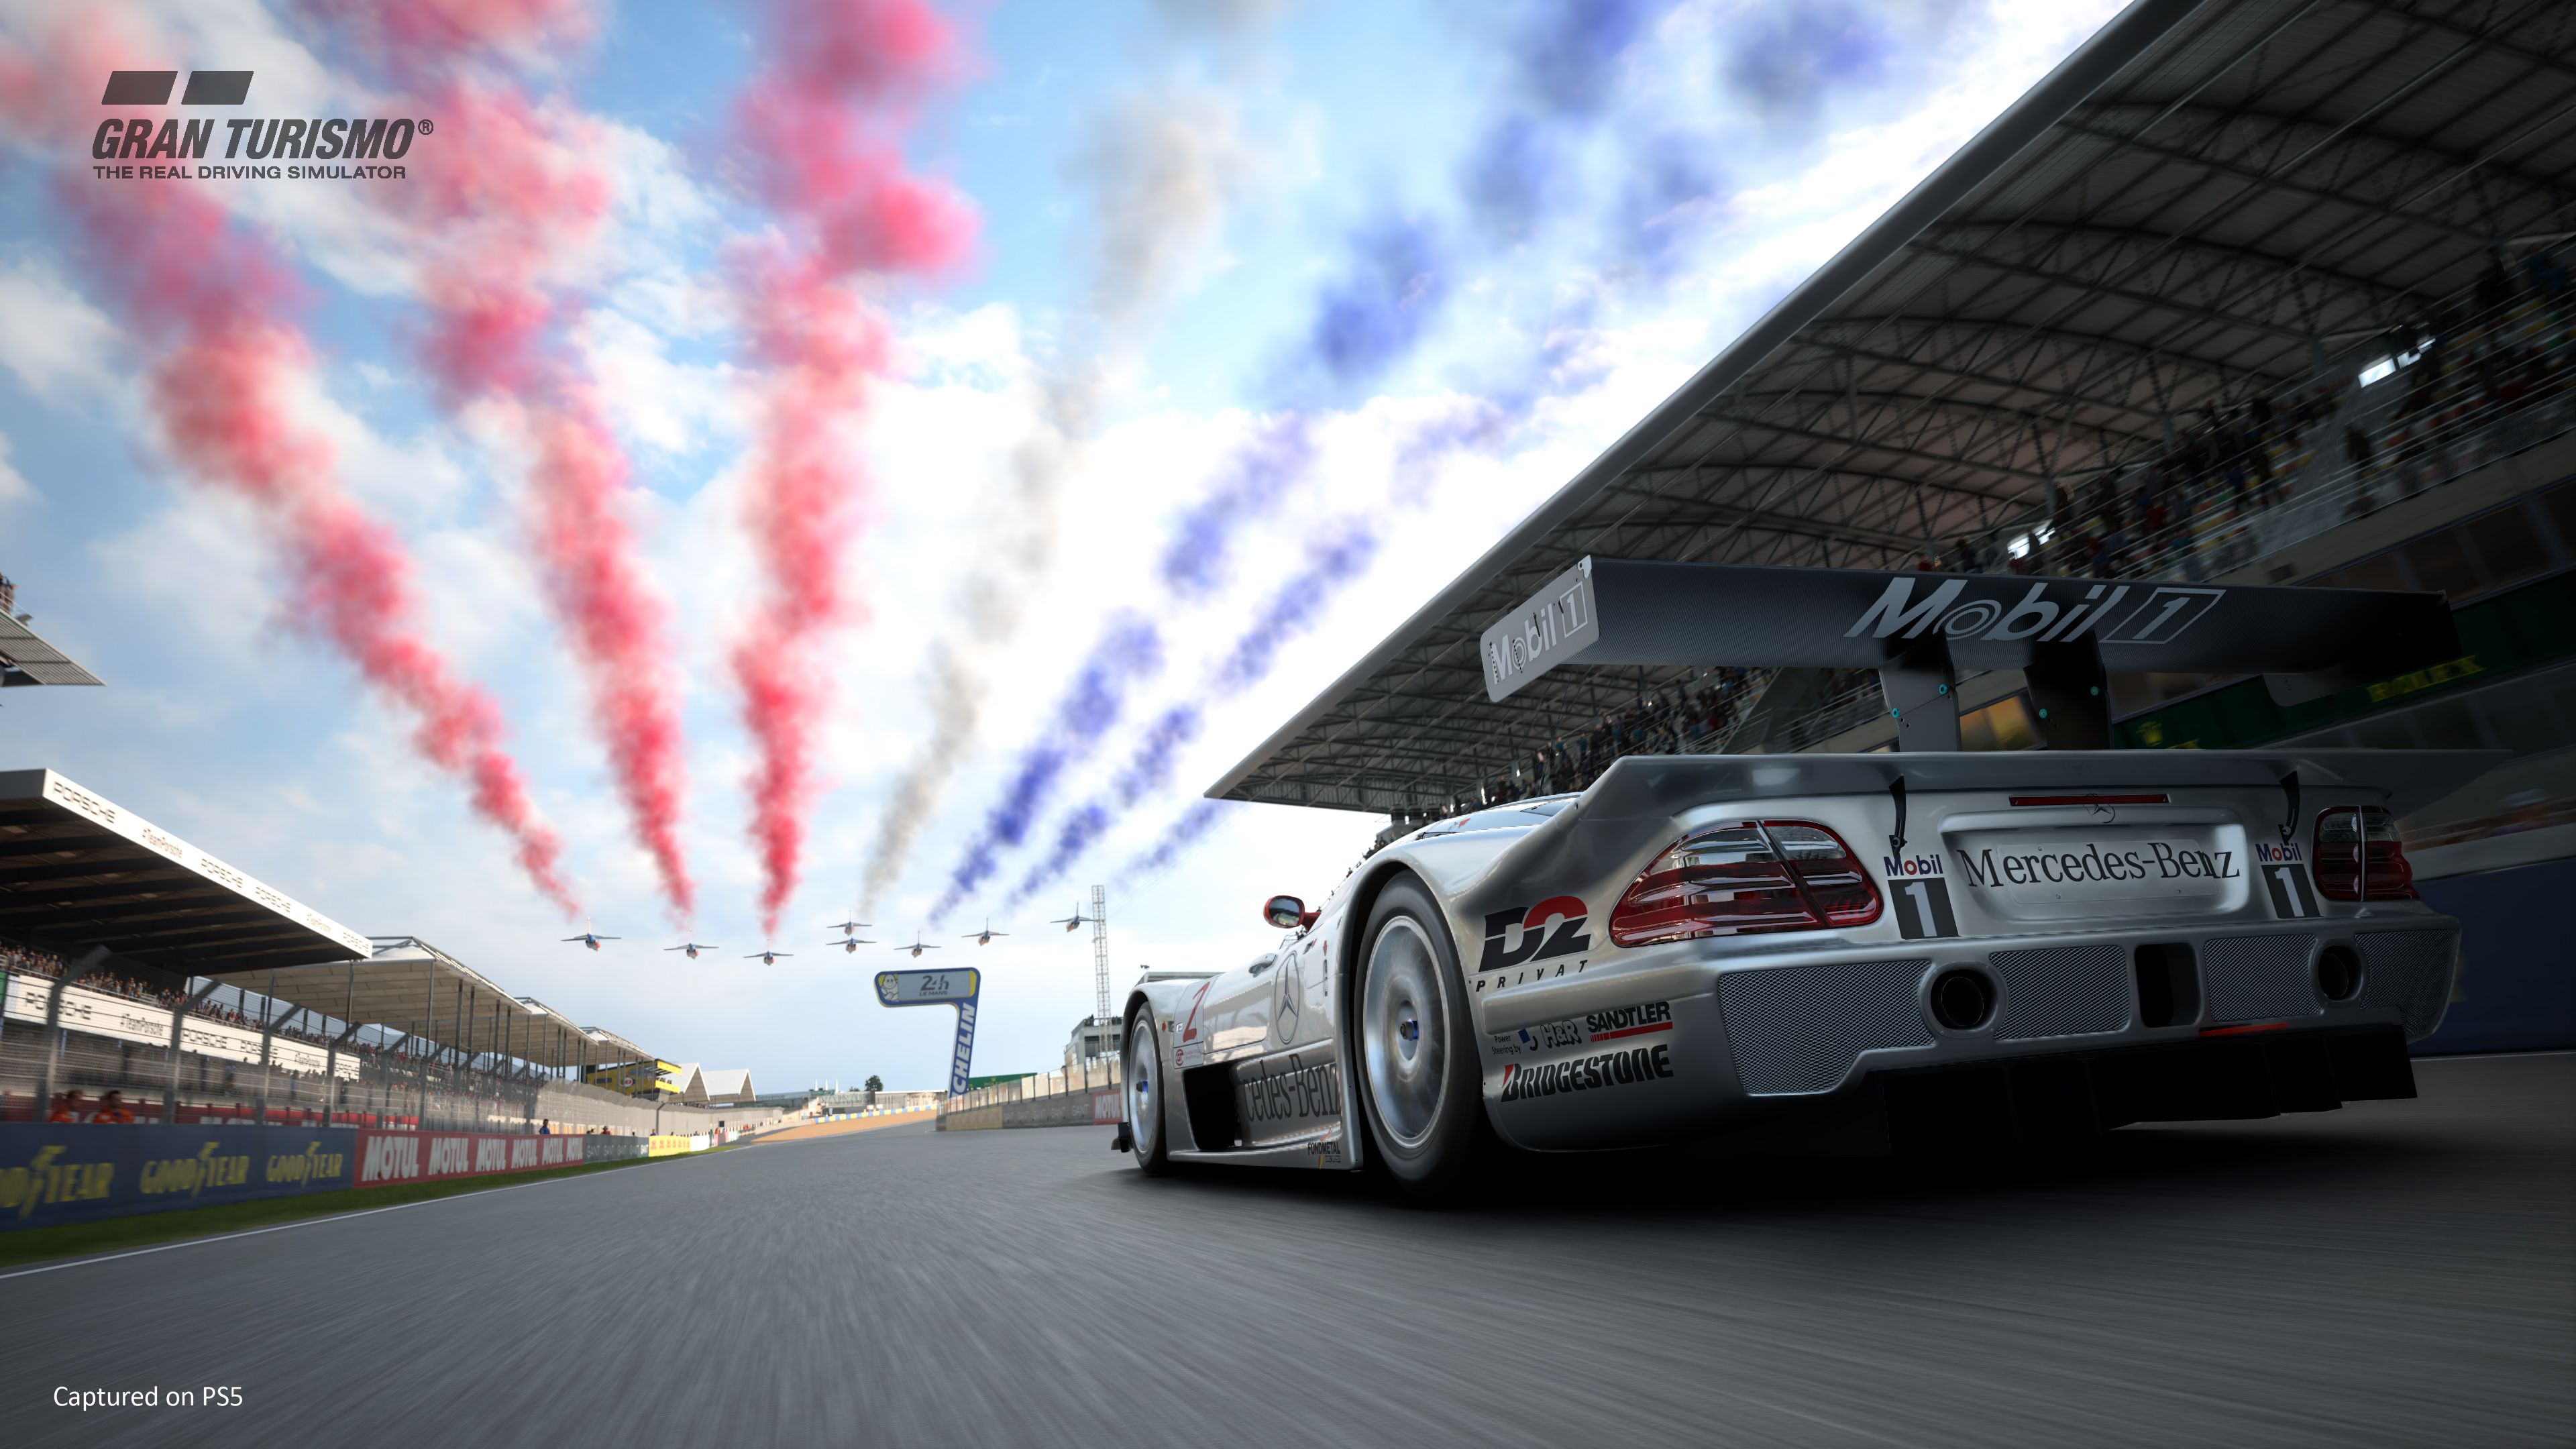 Gran Turismo 7 Made Me Fall In Love With Cars Again